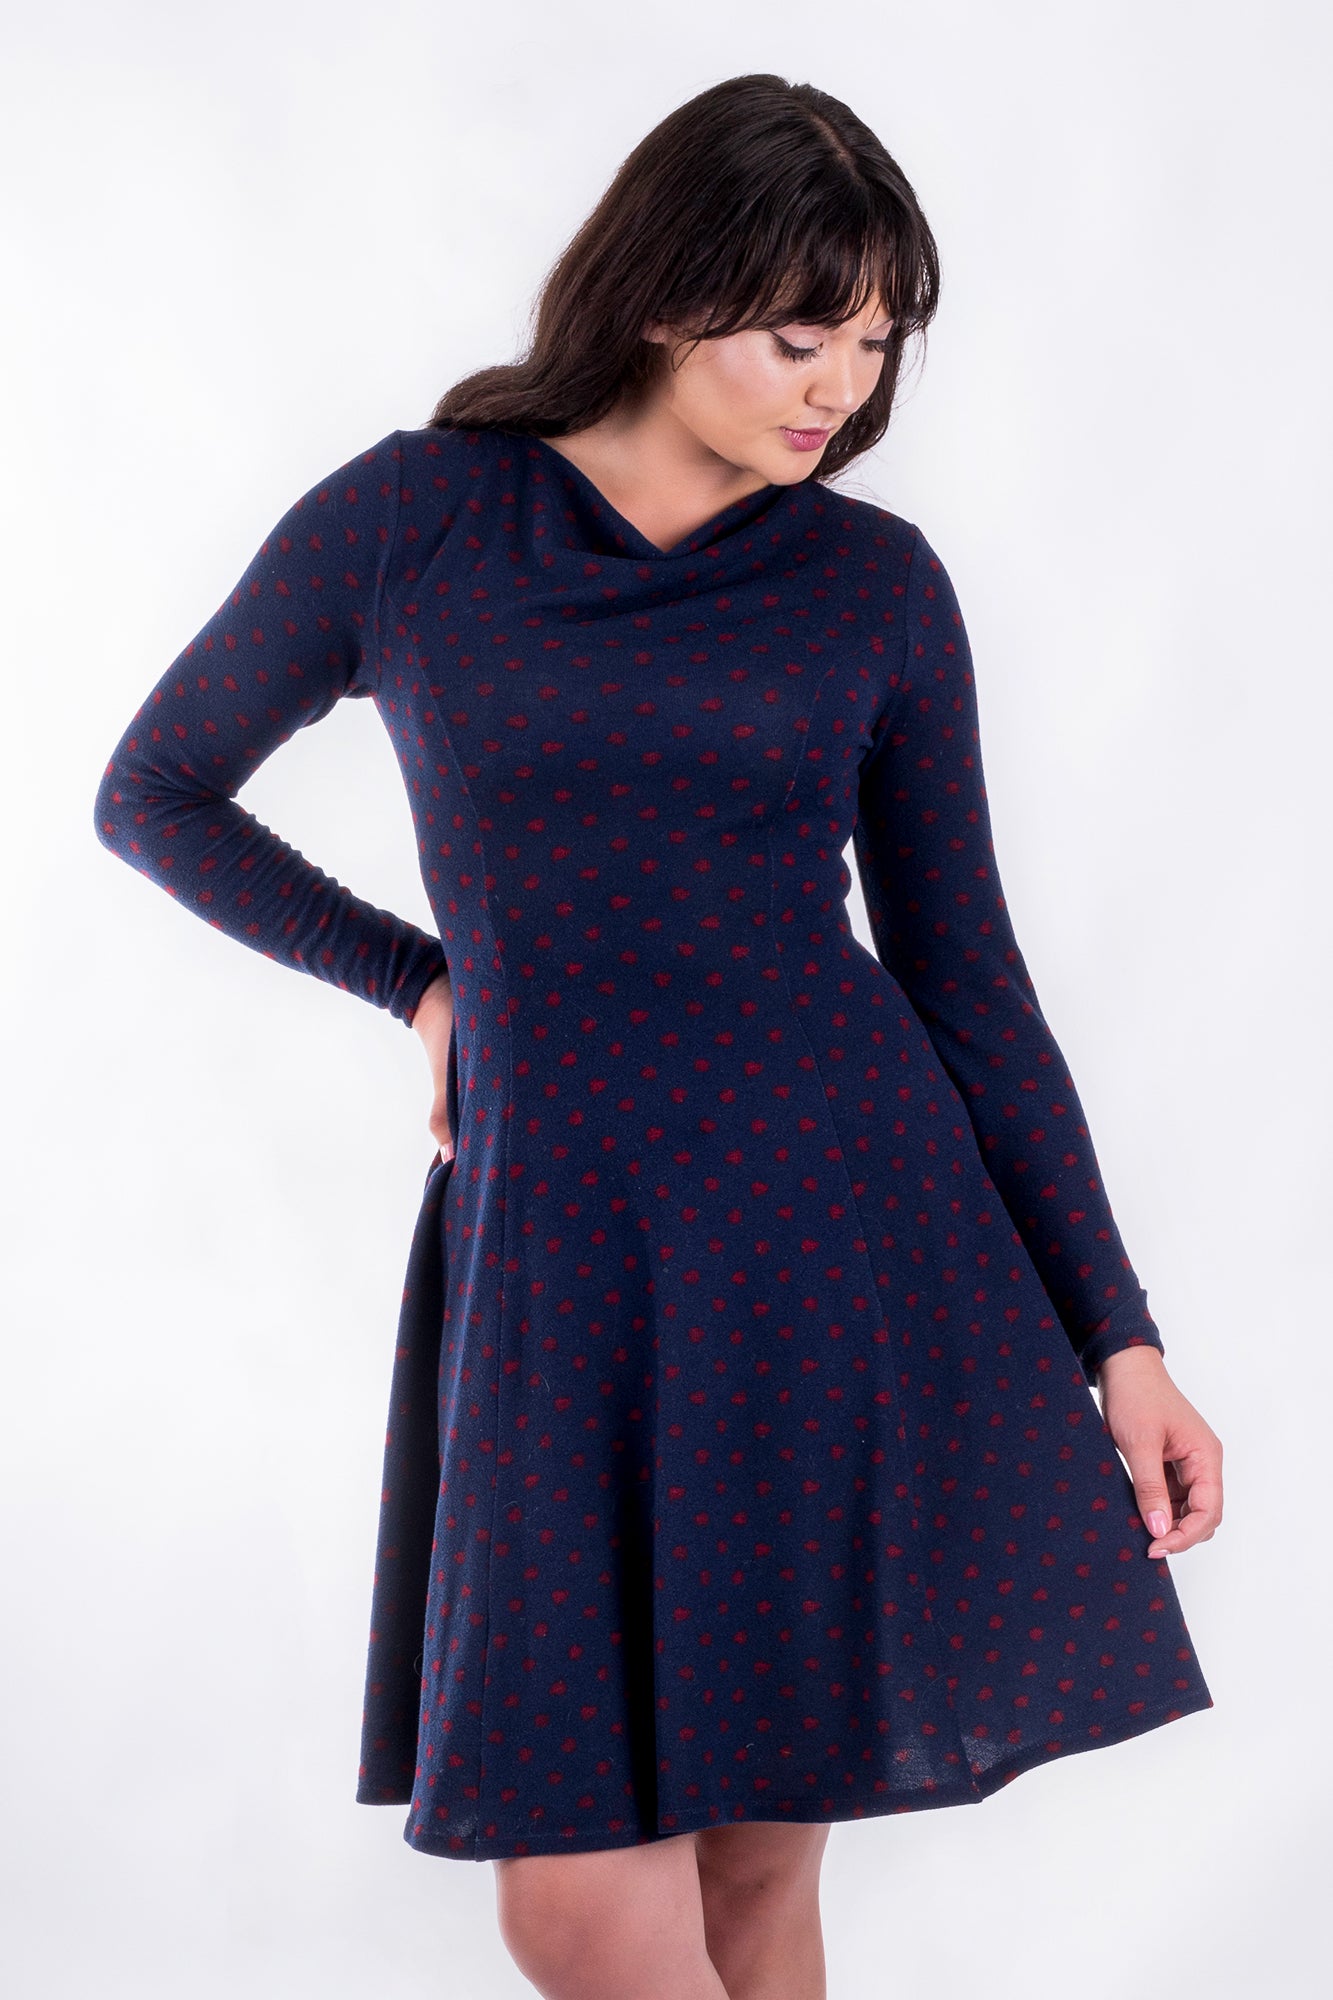 Forget-Me-Not Clementine three-quarter sleeved dress pattern, full length three quarters view, in magenta.